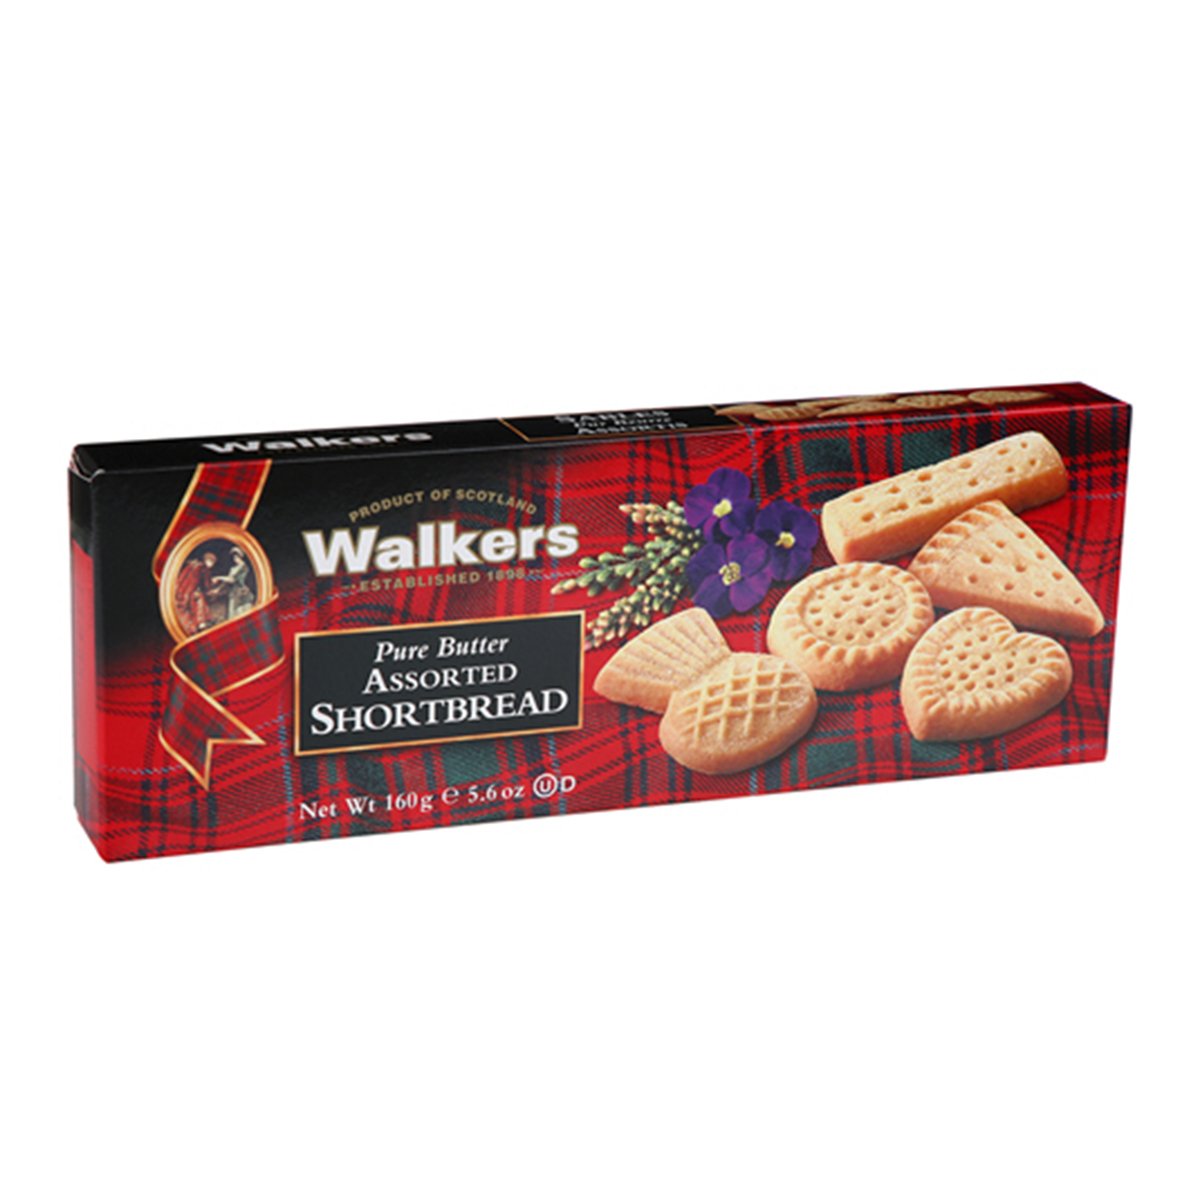 Walkers Pure Butter Assorted Shortbread 160 g